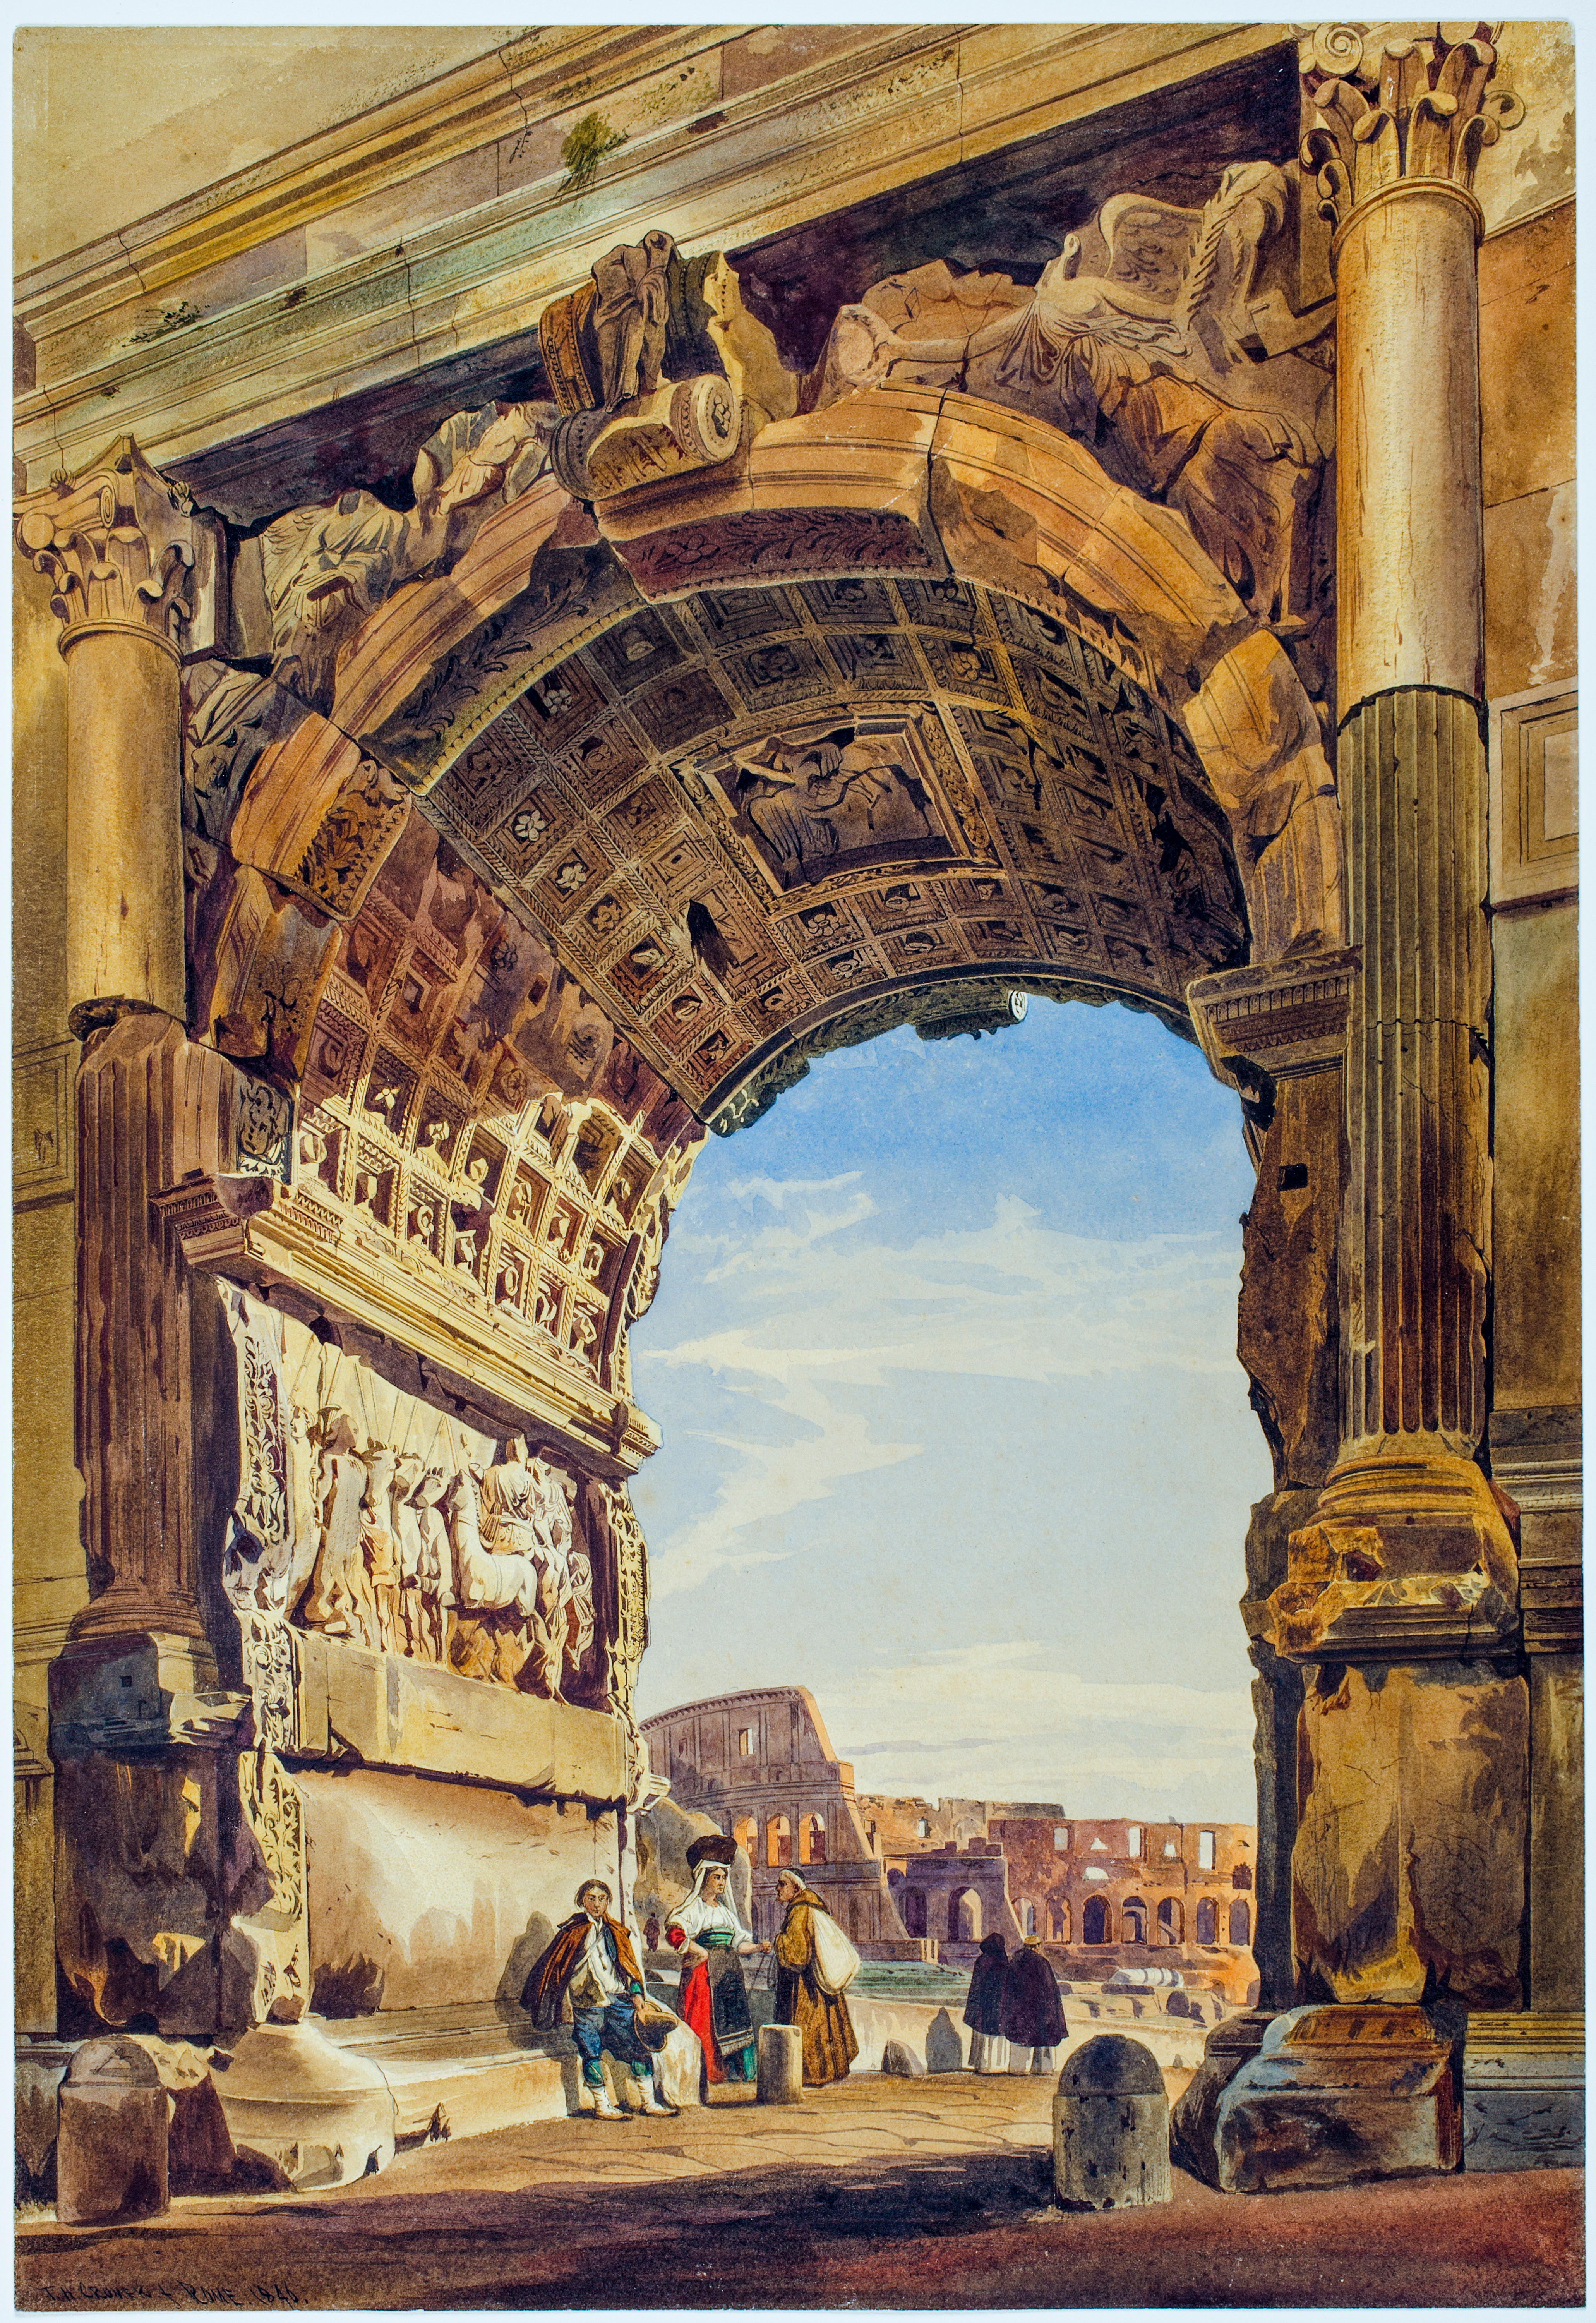 The Arch of Titus and the Coliseum, Rome, 1846